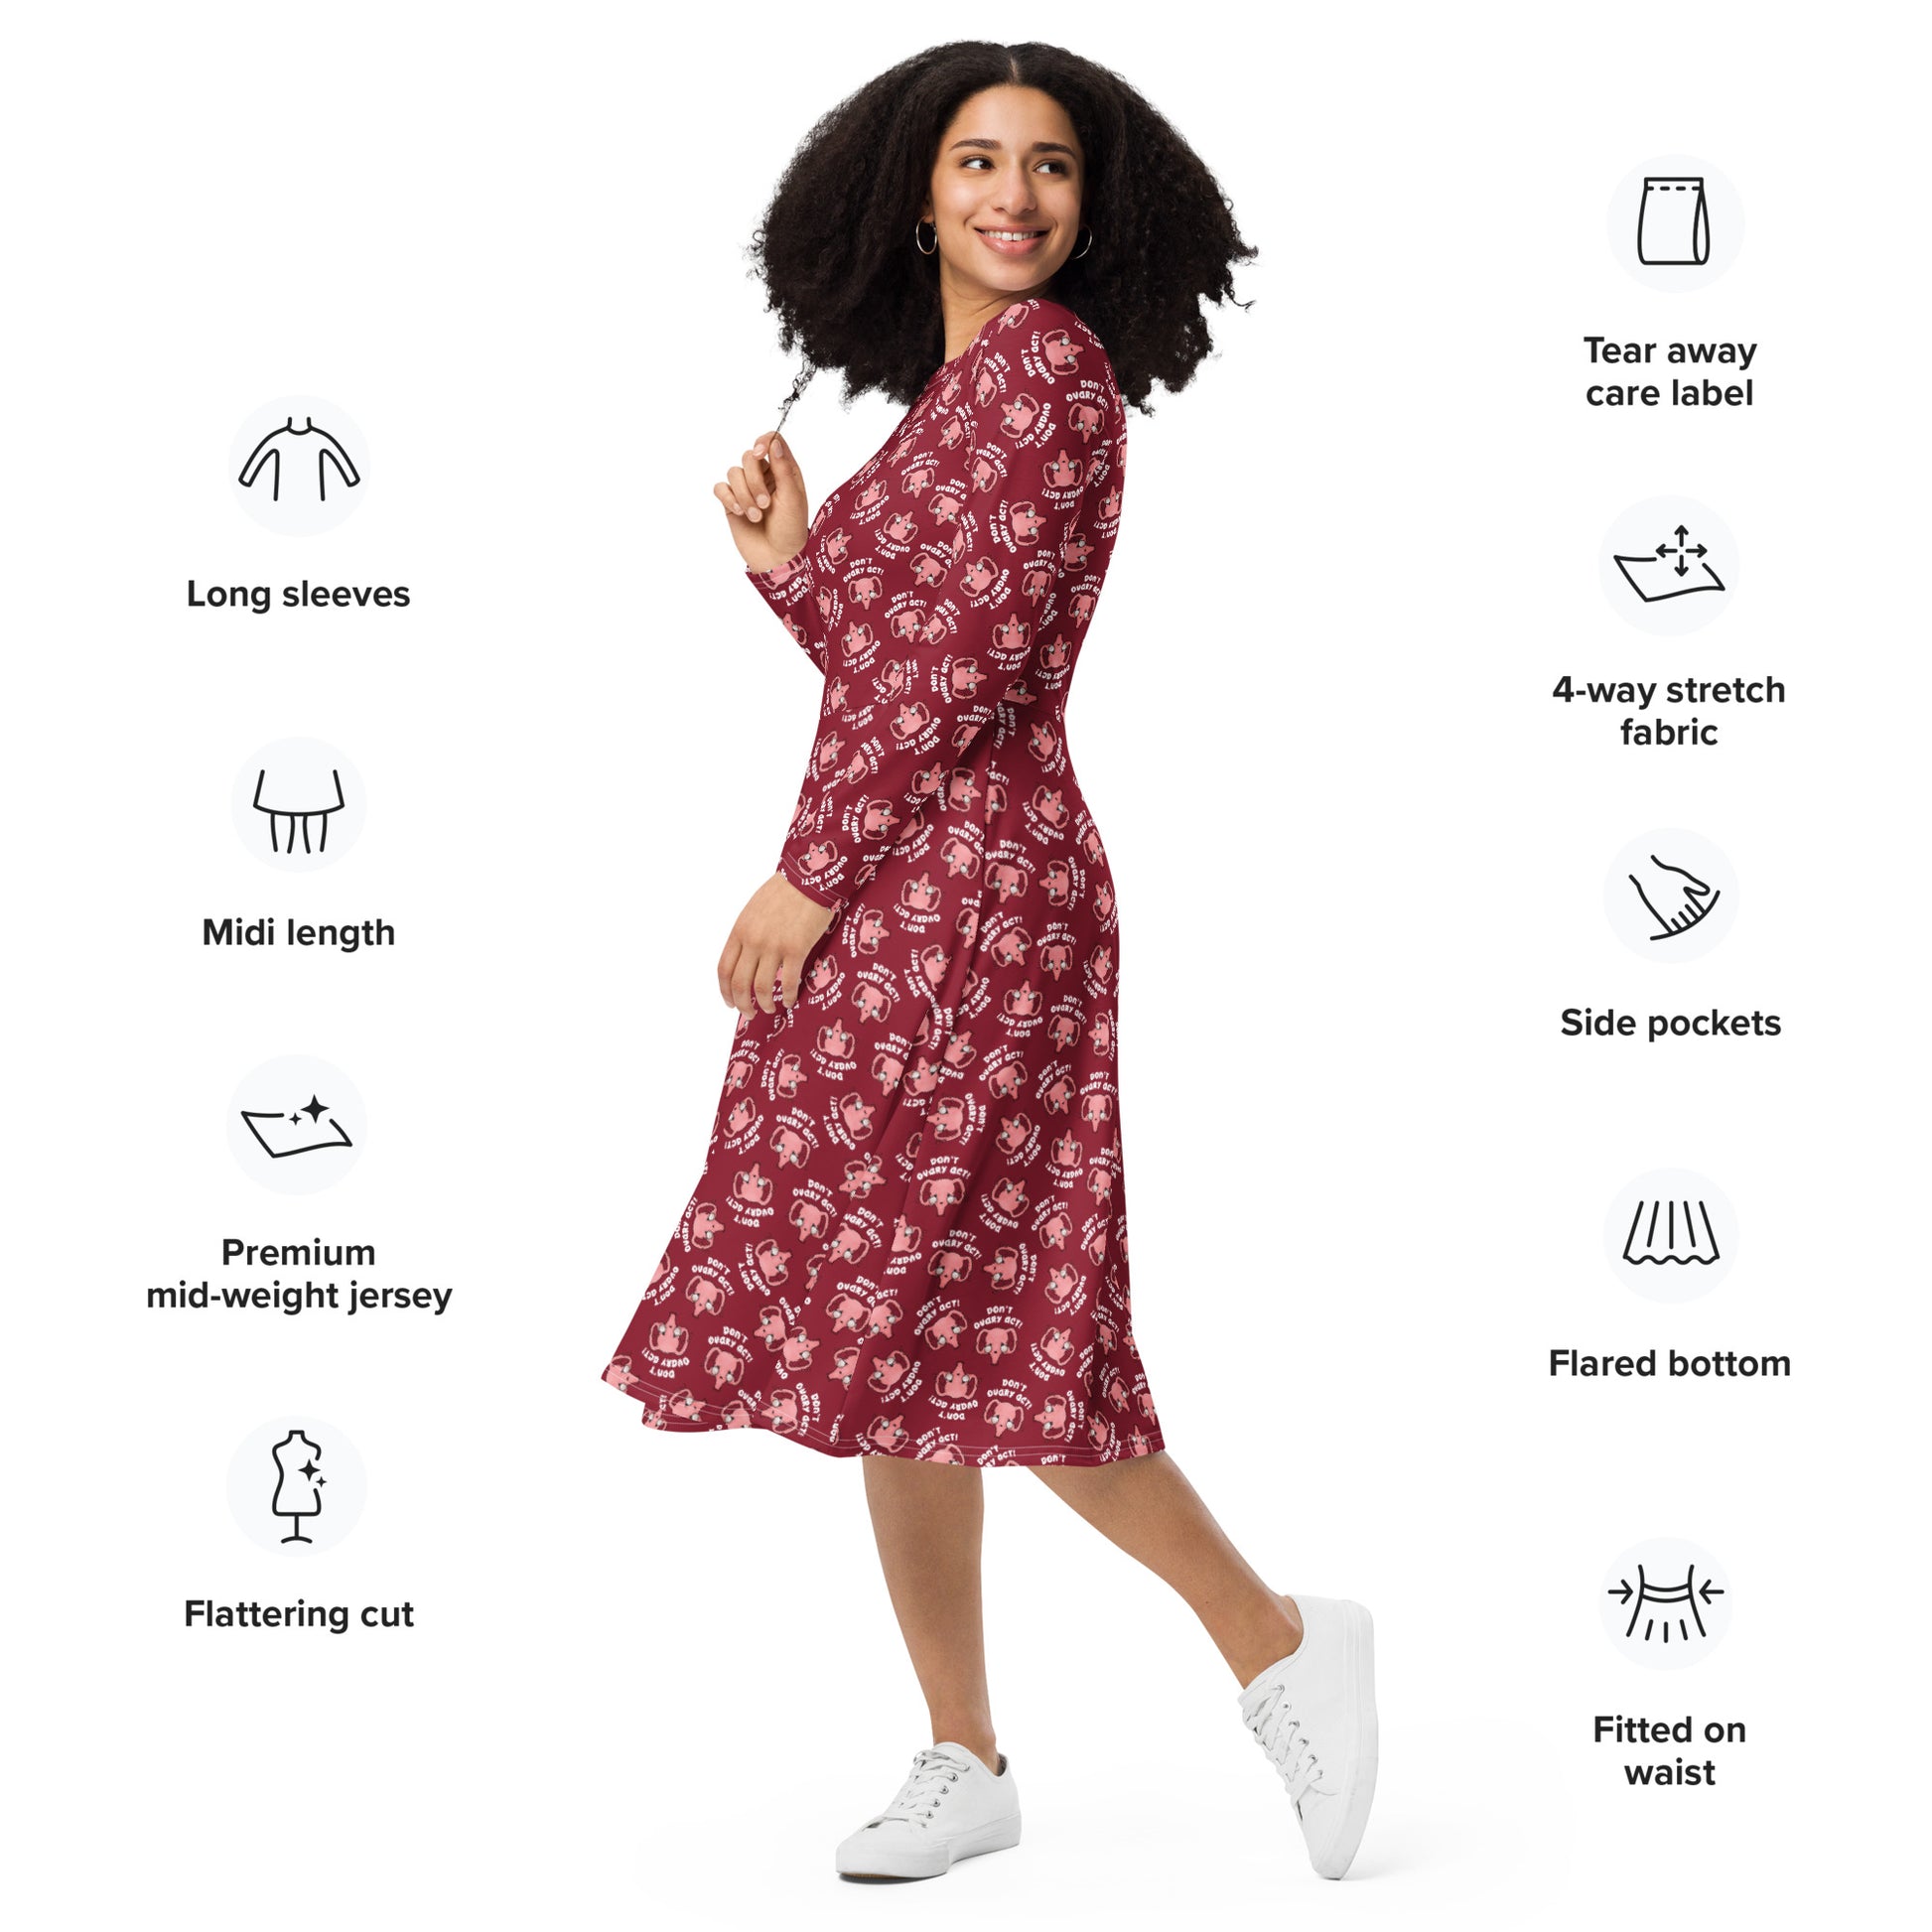 Don't Ovary Act dress in red showing with labels: Long sleeves, midi length, premium mid-weight jersey, flattering cut, tear away care label, four way stretch fabric, side pockets, flared bottom and fitted on waist